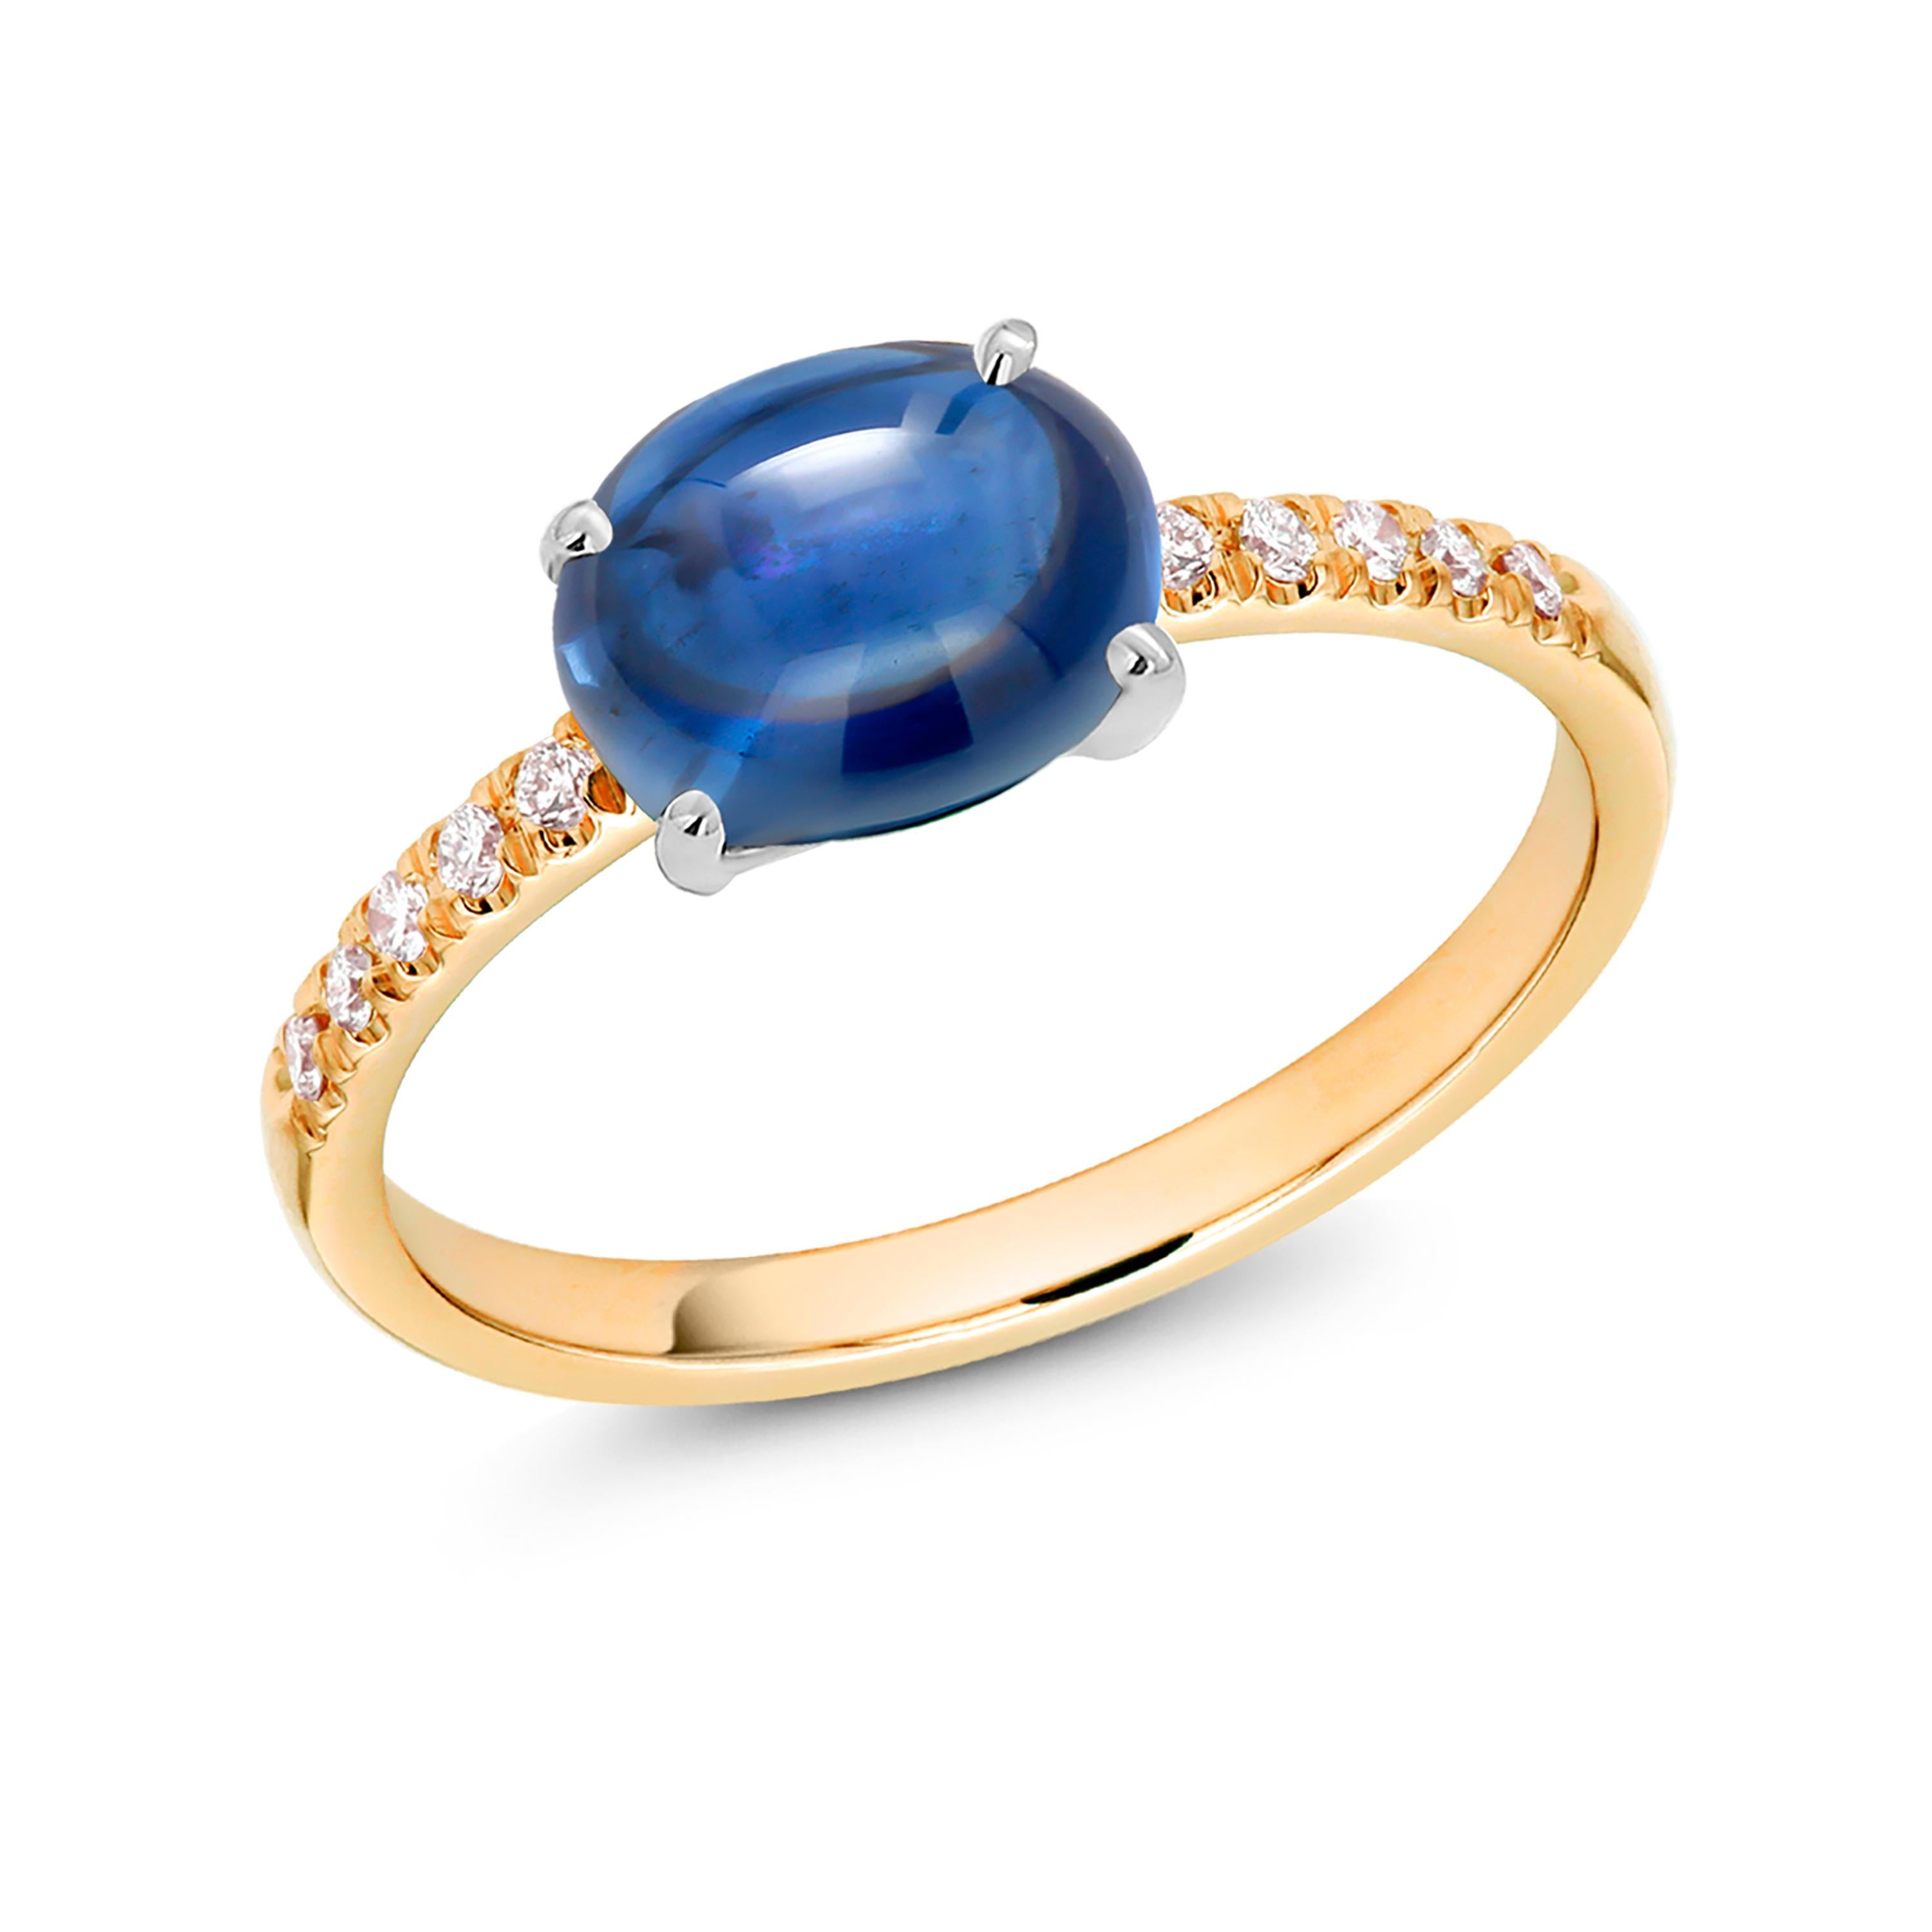 Women's Ceylon Cabochon Sapphire Diamond 3.65 Carat Yellow and White Gold Size 7 Ring For Sale